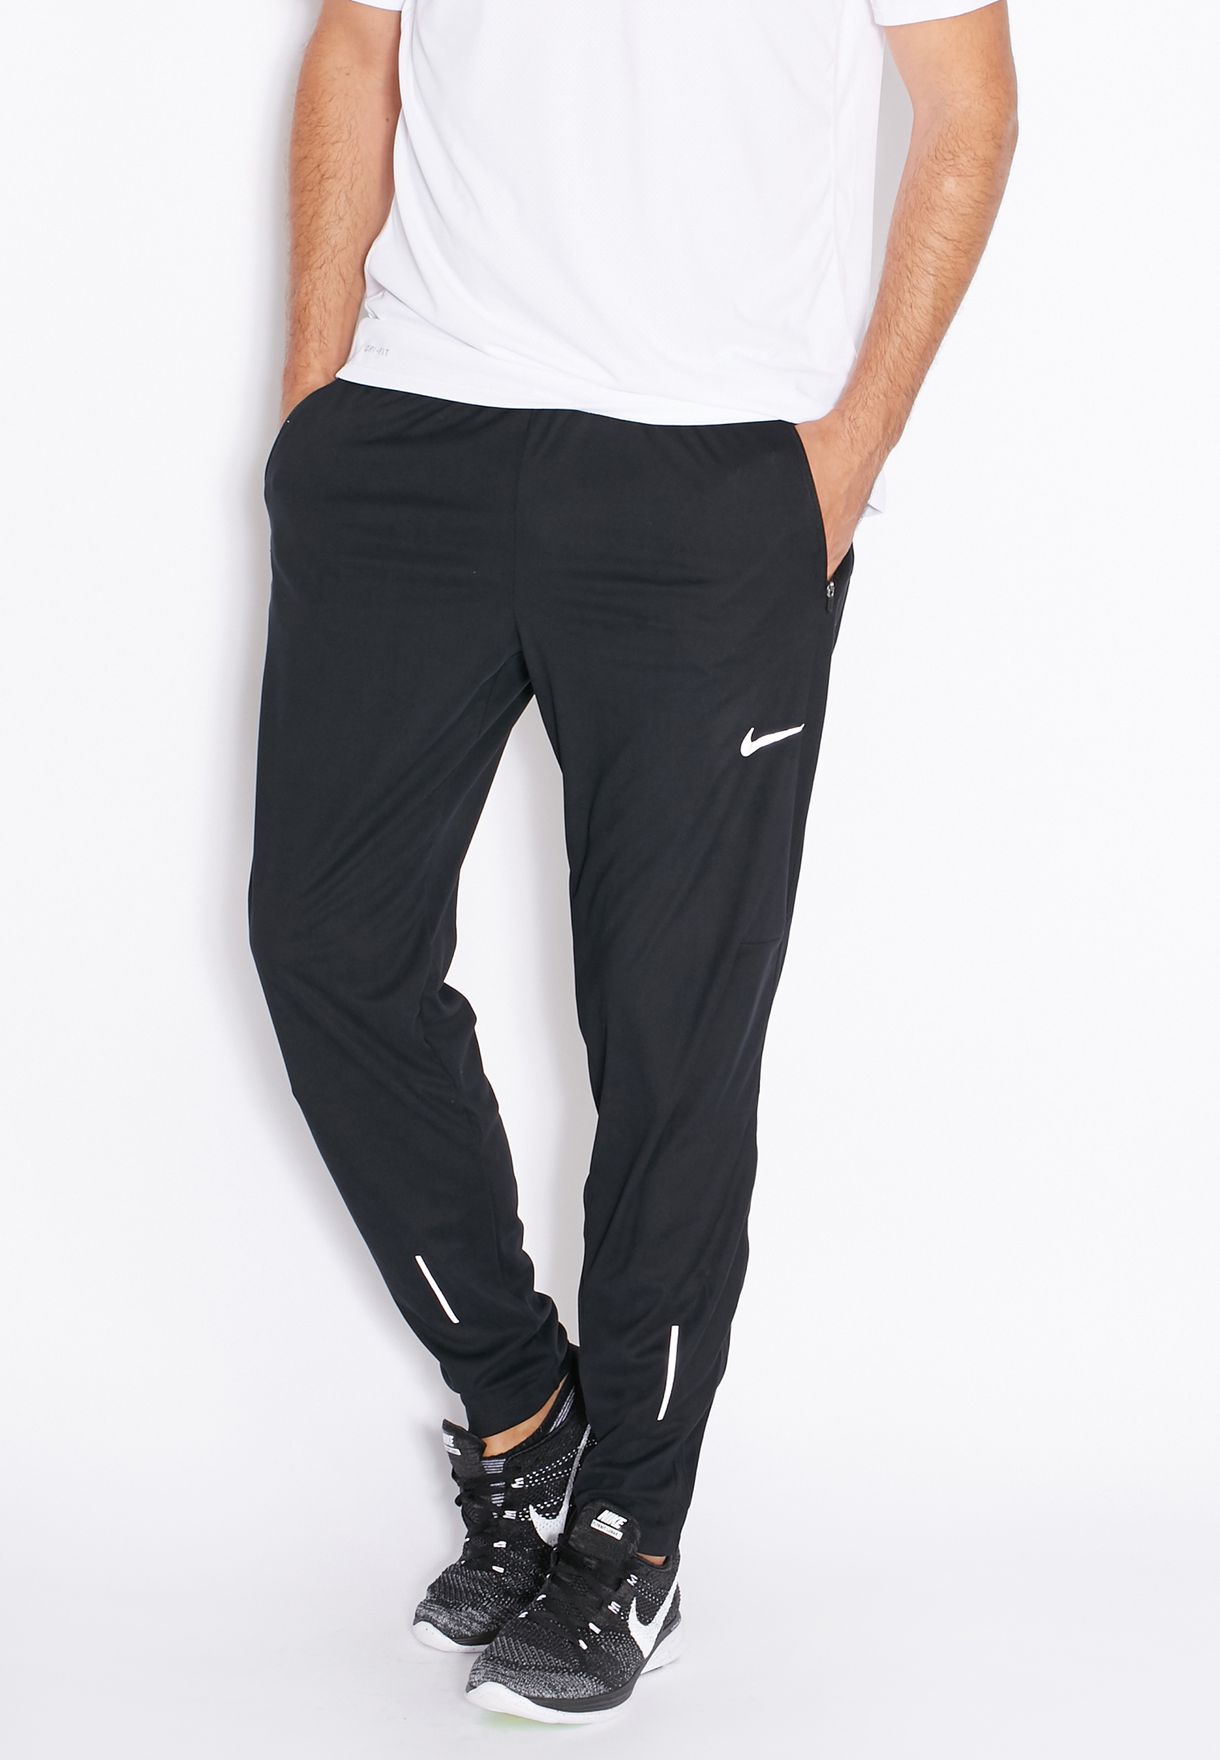 Nike Racer Track Pant Clearance, GET 52% kph.org.pl